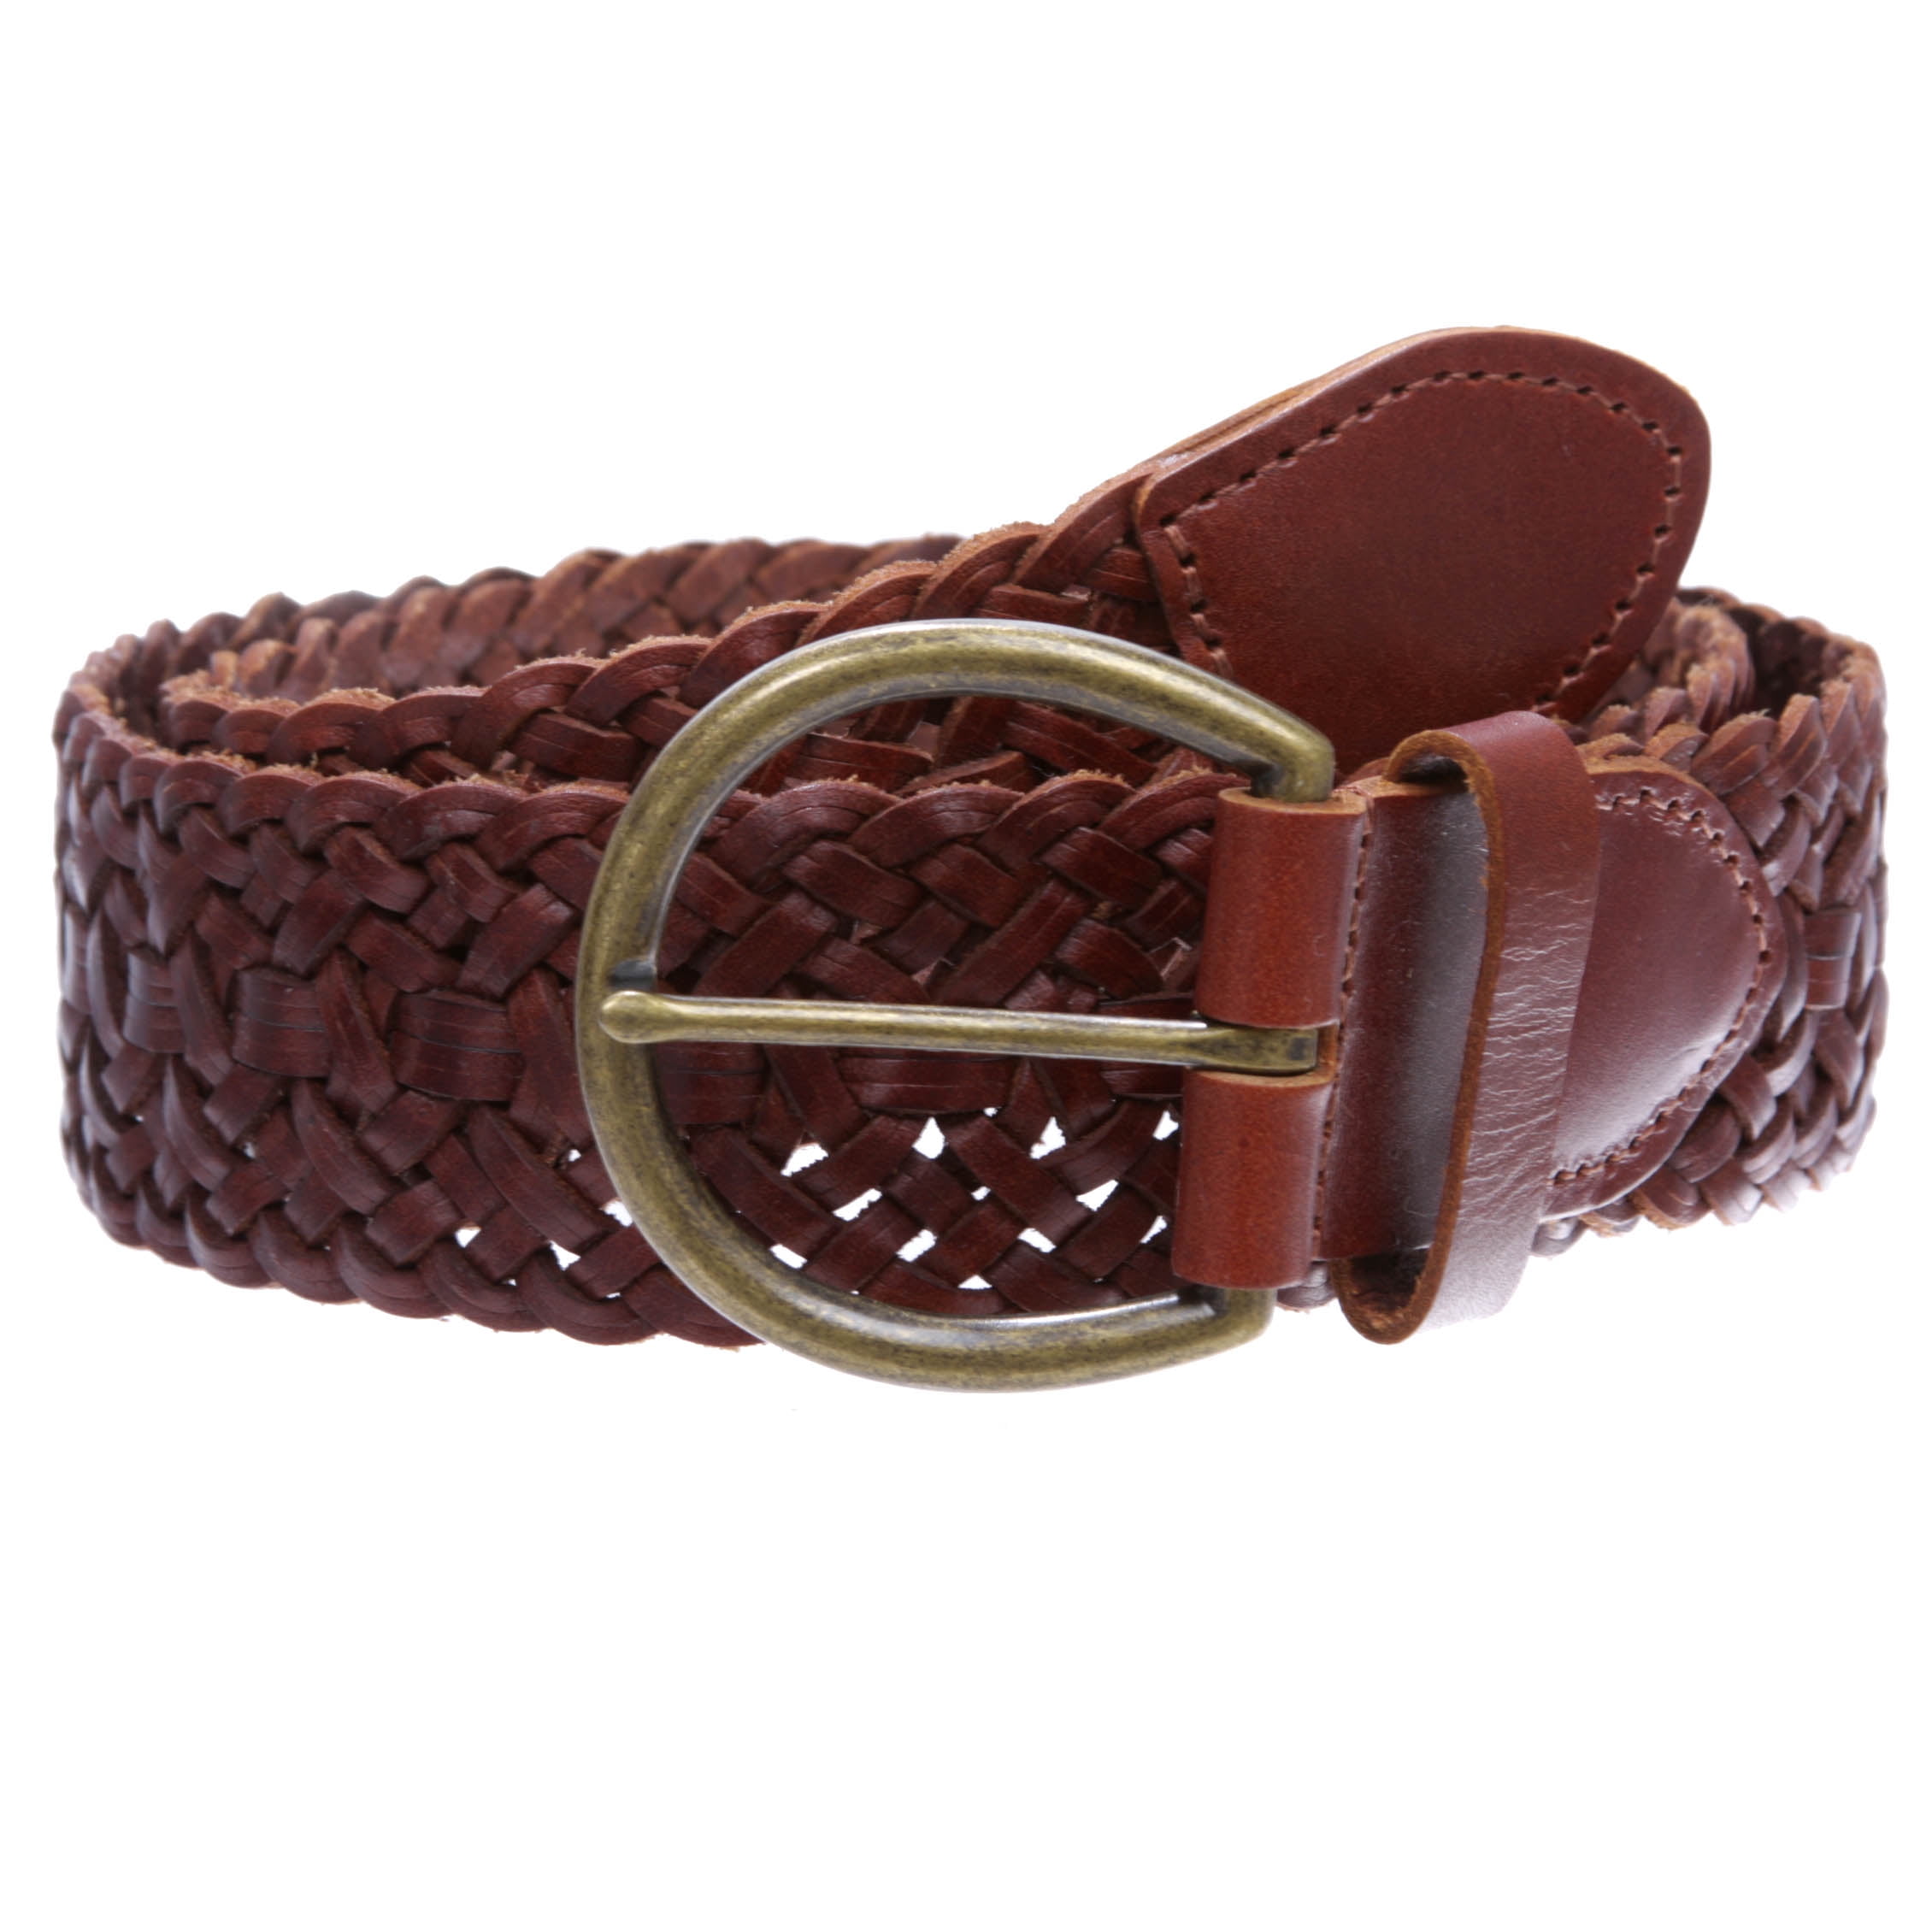 Women's 2 (50mm) Braided Woven Leather Belt with Horseshoe Buckle